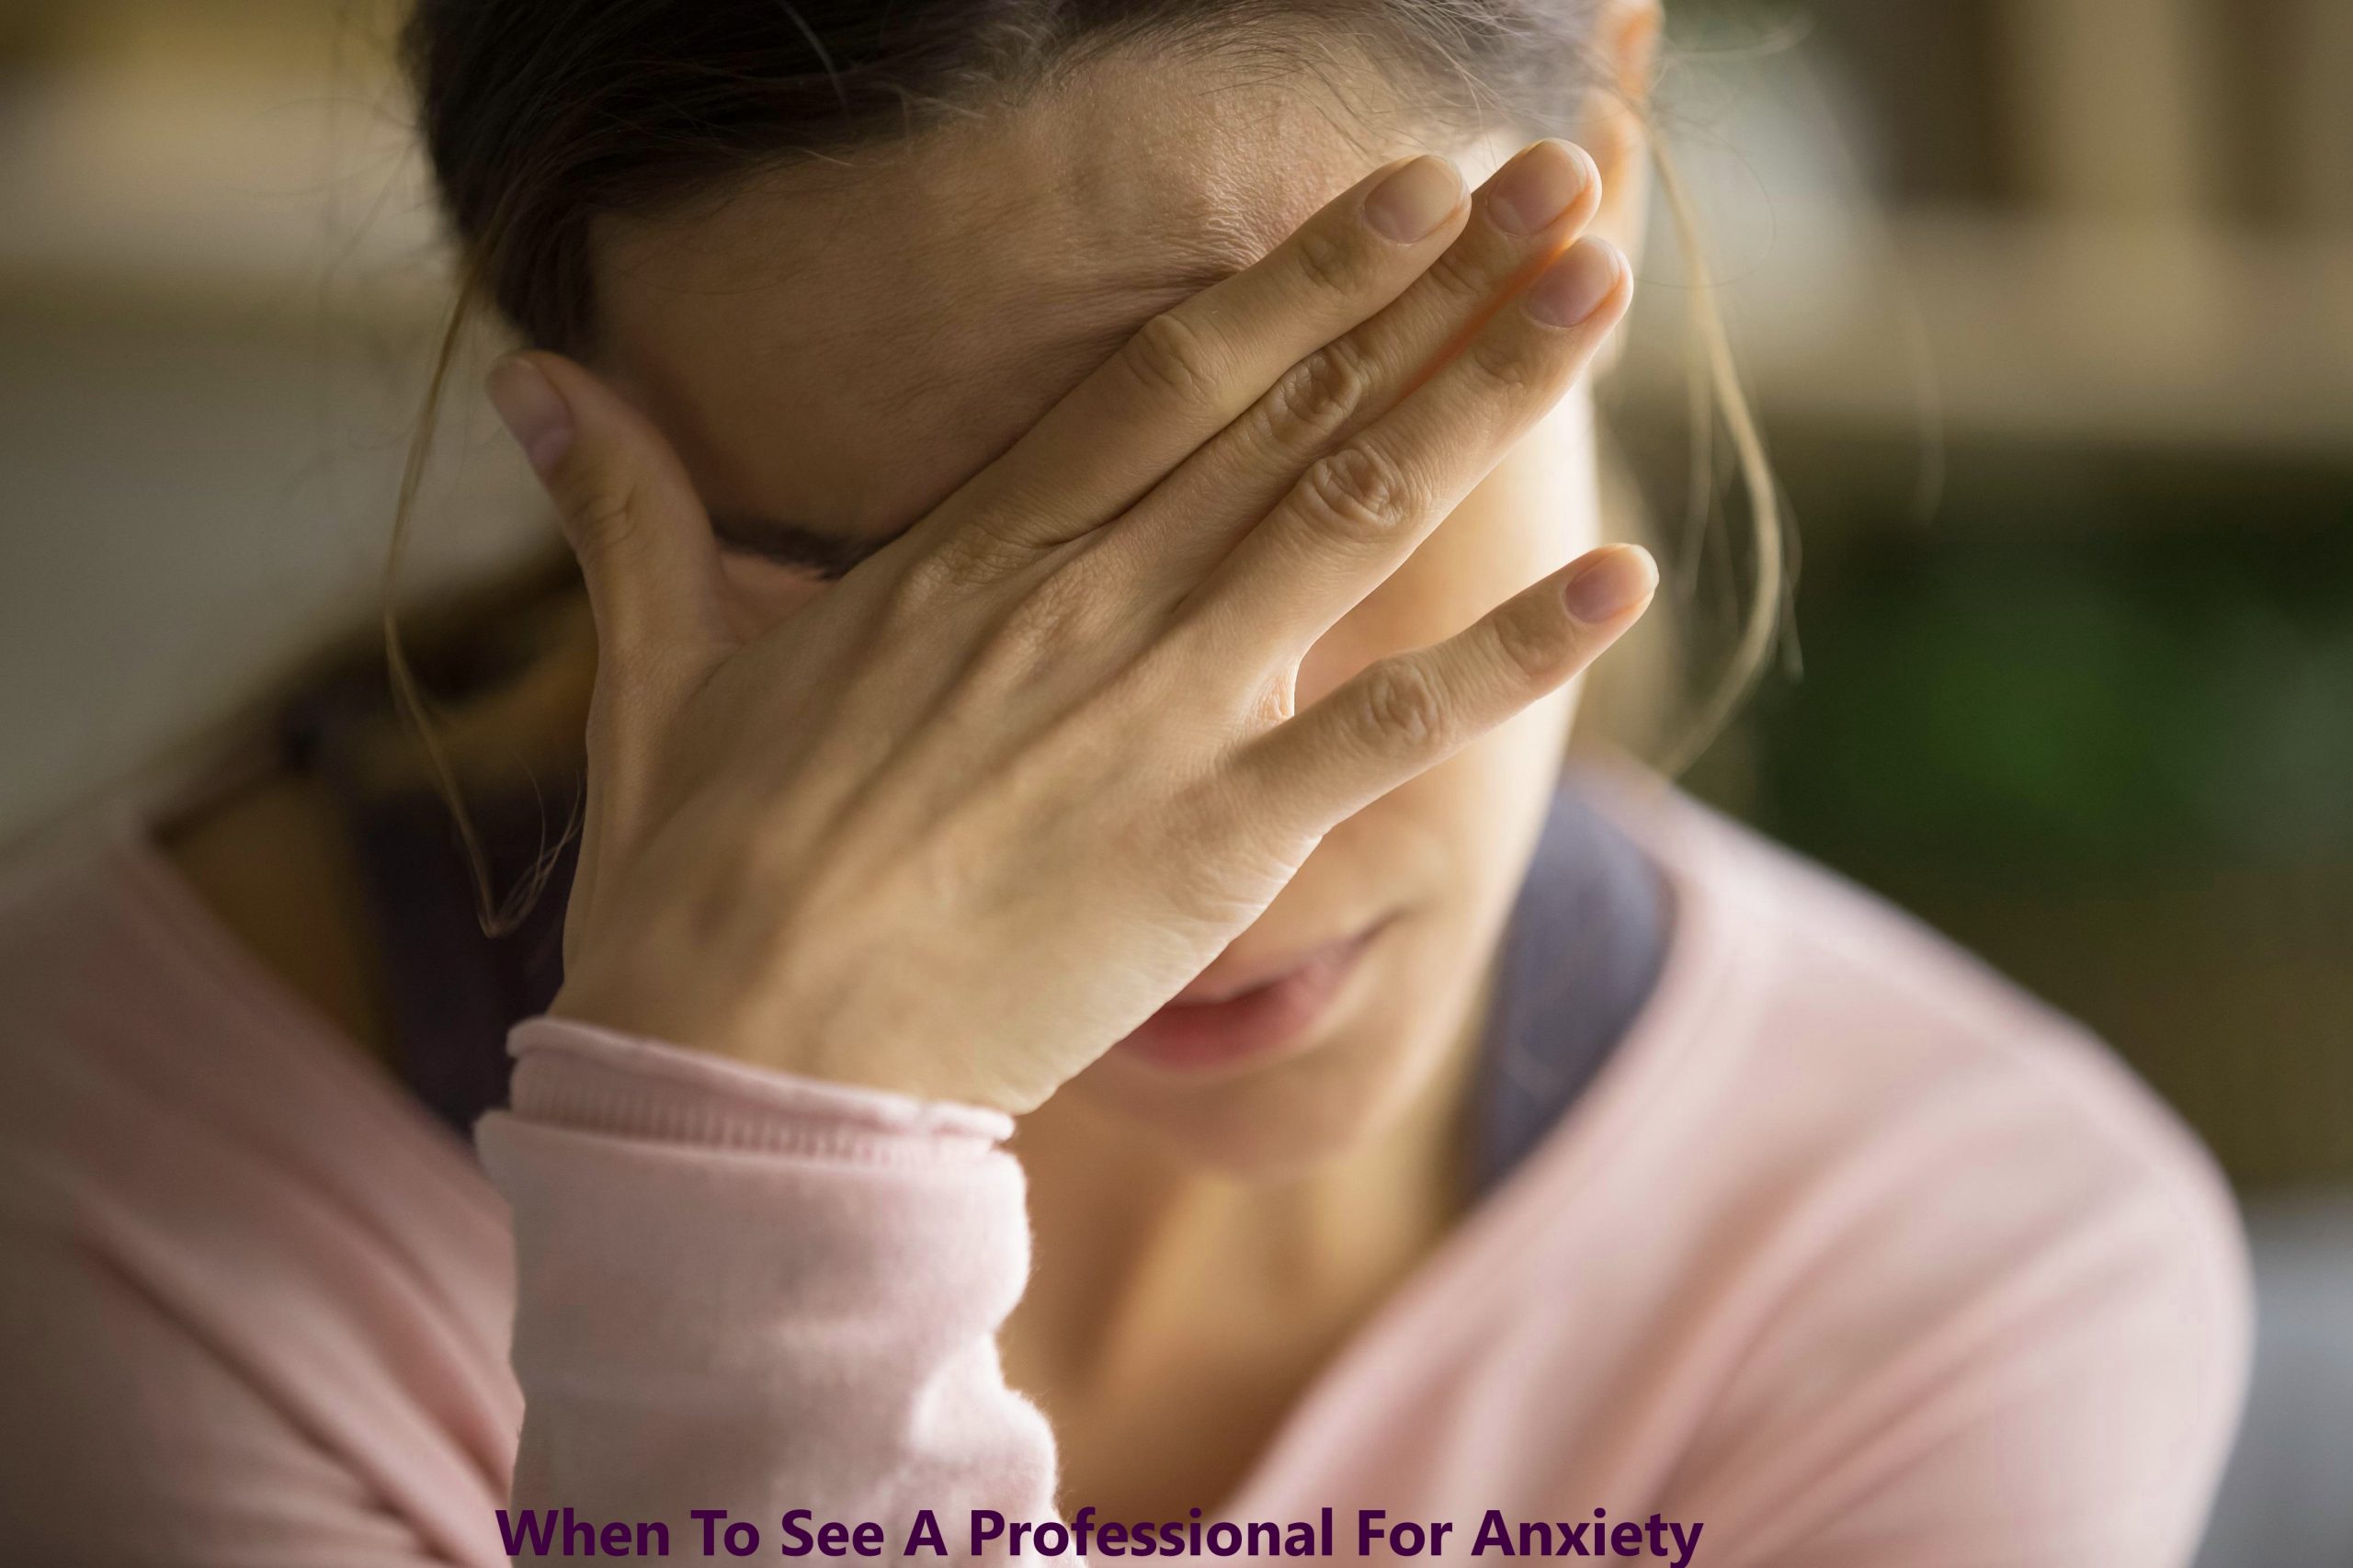 Recognizing The Signs When To See A Professional For Anxiety